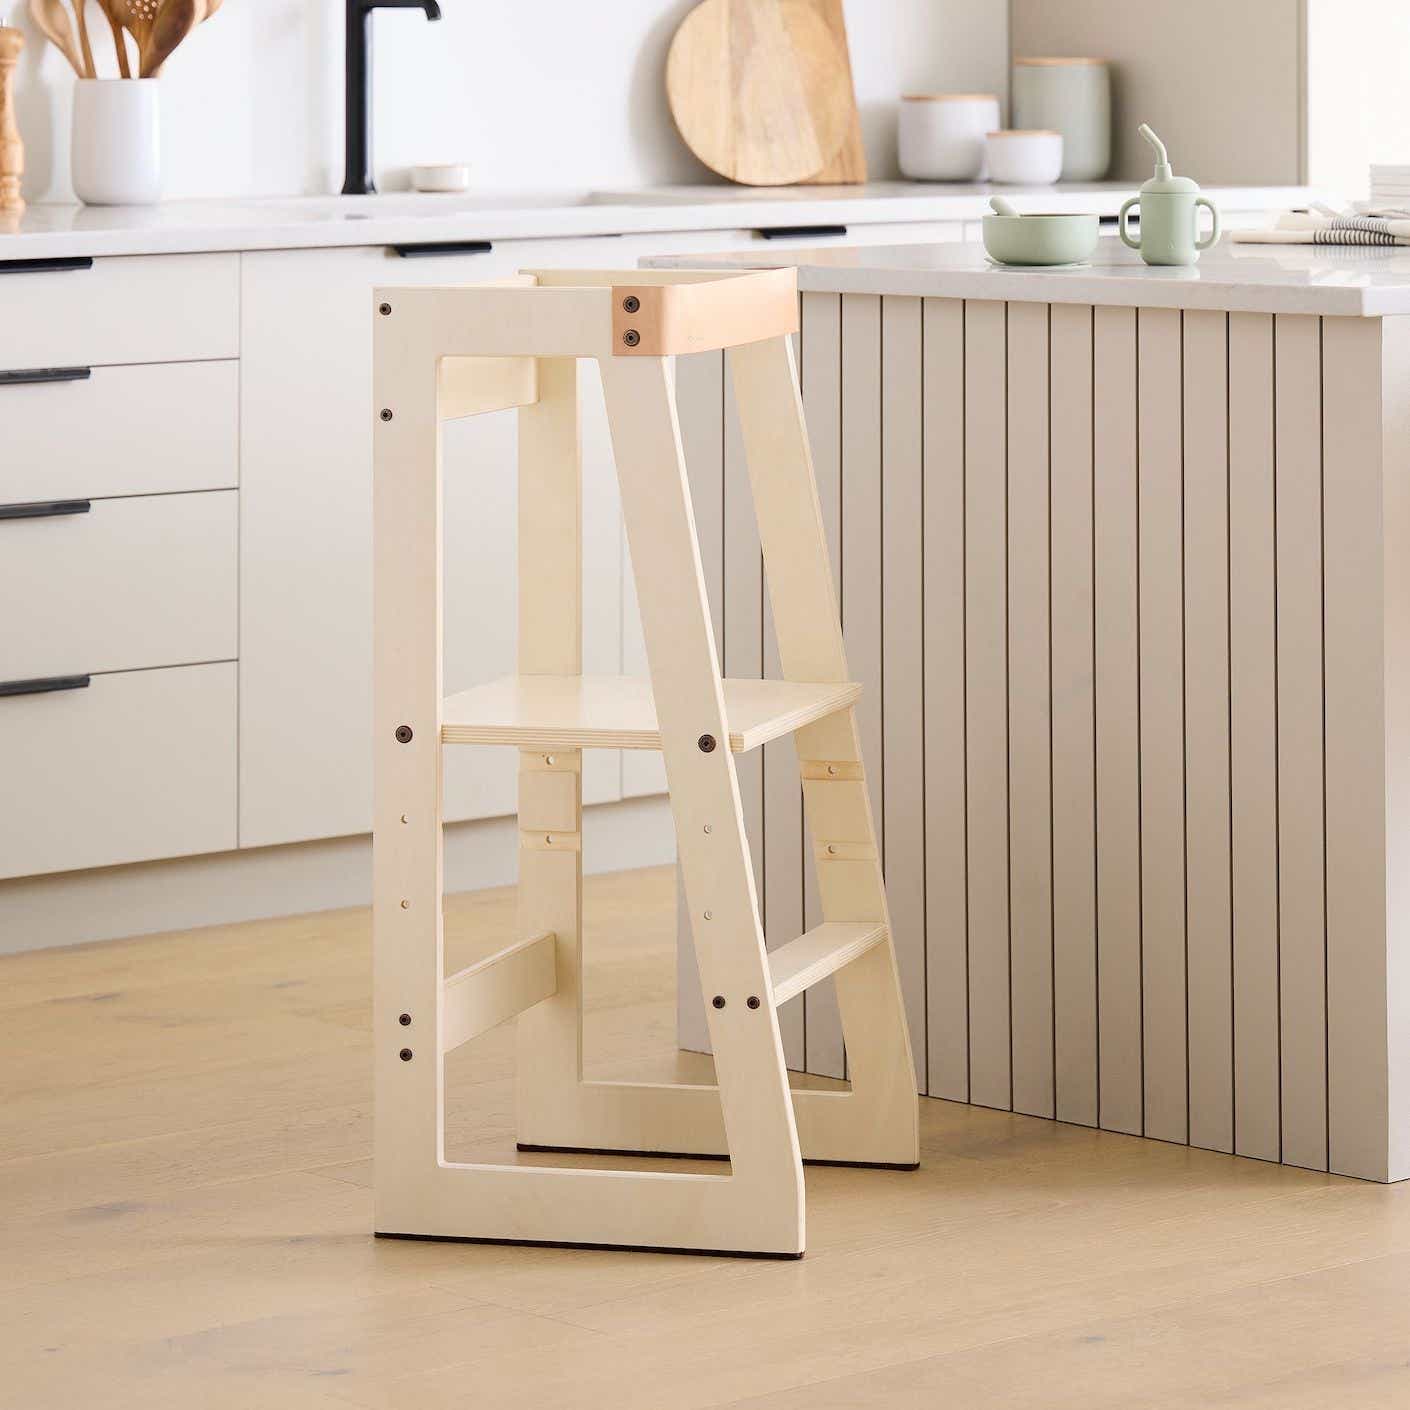 A wooden toddler tower